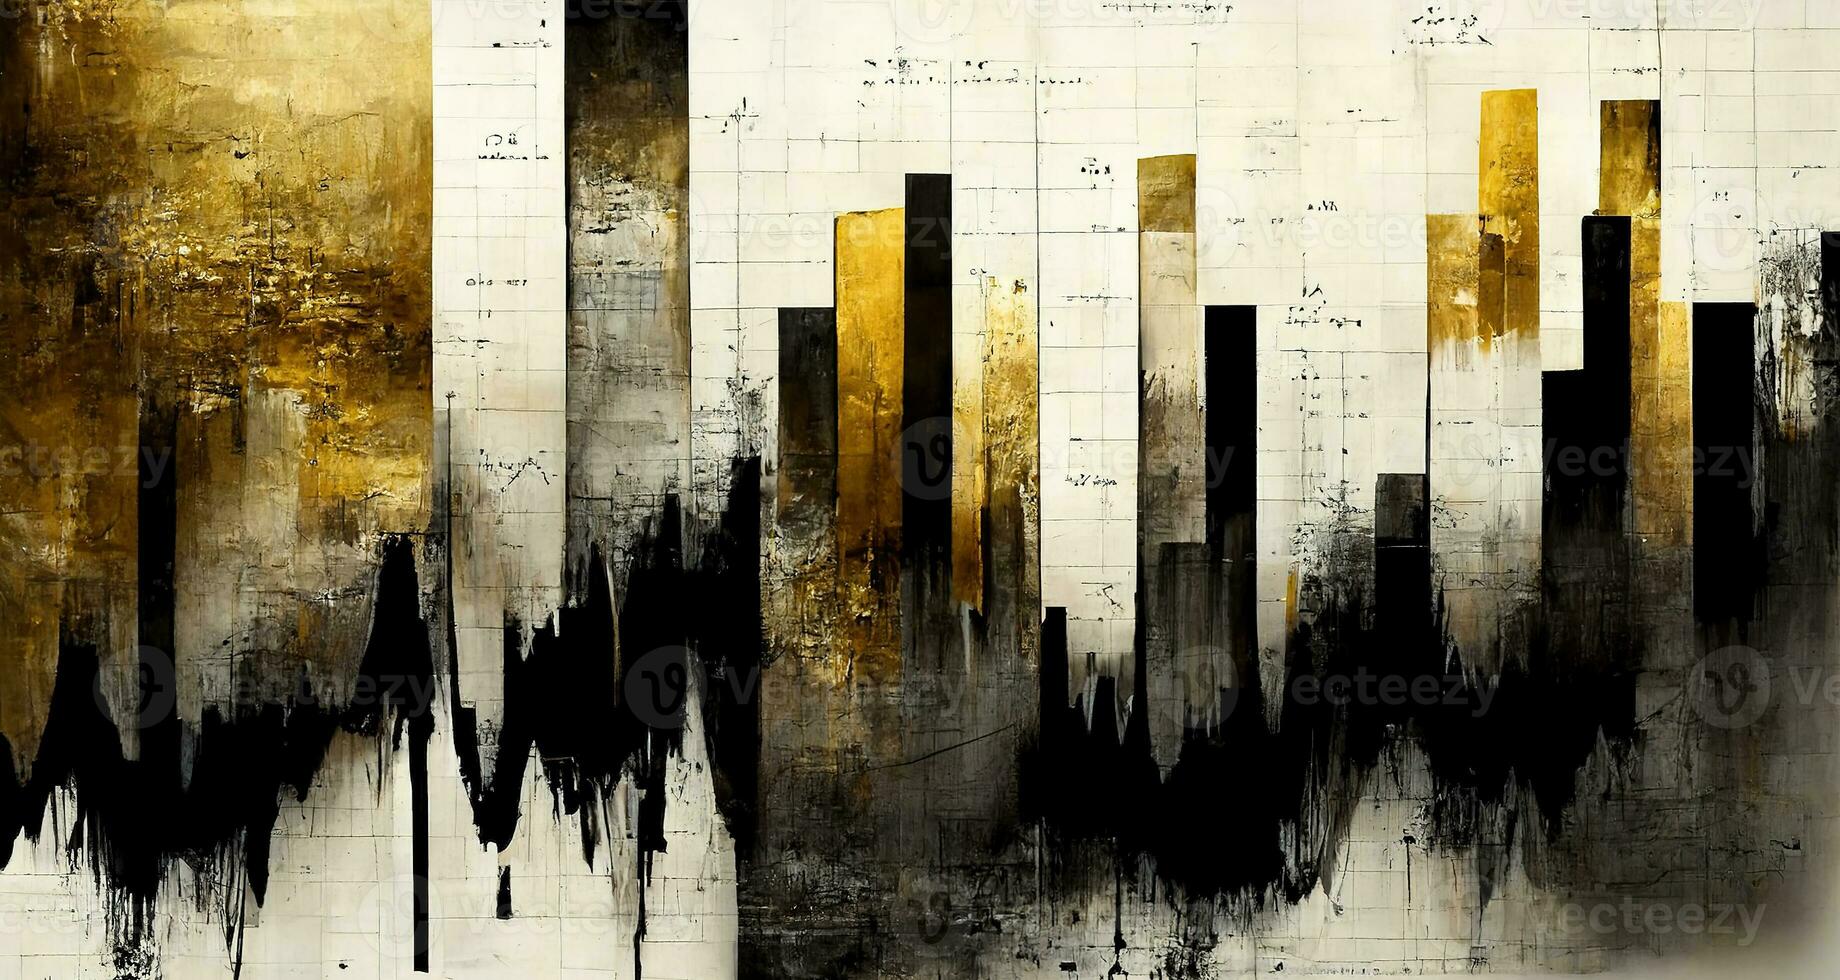 AI generated Generative AI, Black and golden watercolor abstract stock market charts painted background. Ink black street graffiti art on a textured paper vintage background, washes and brush strokes photo